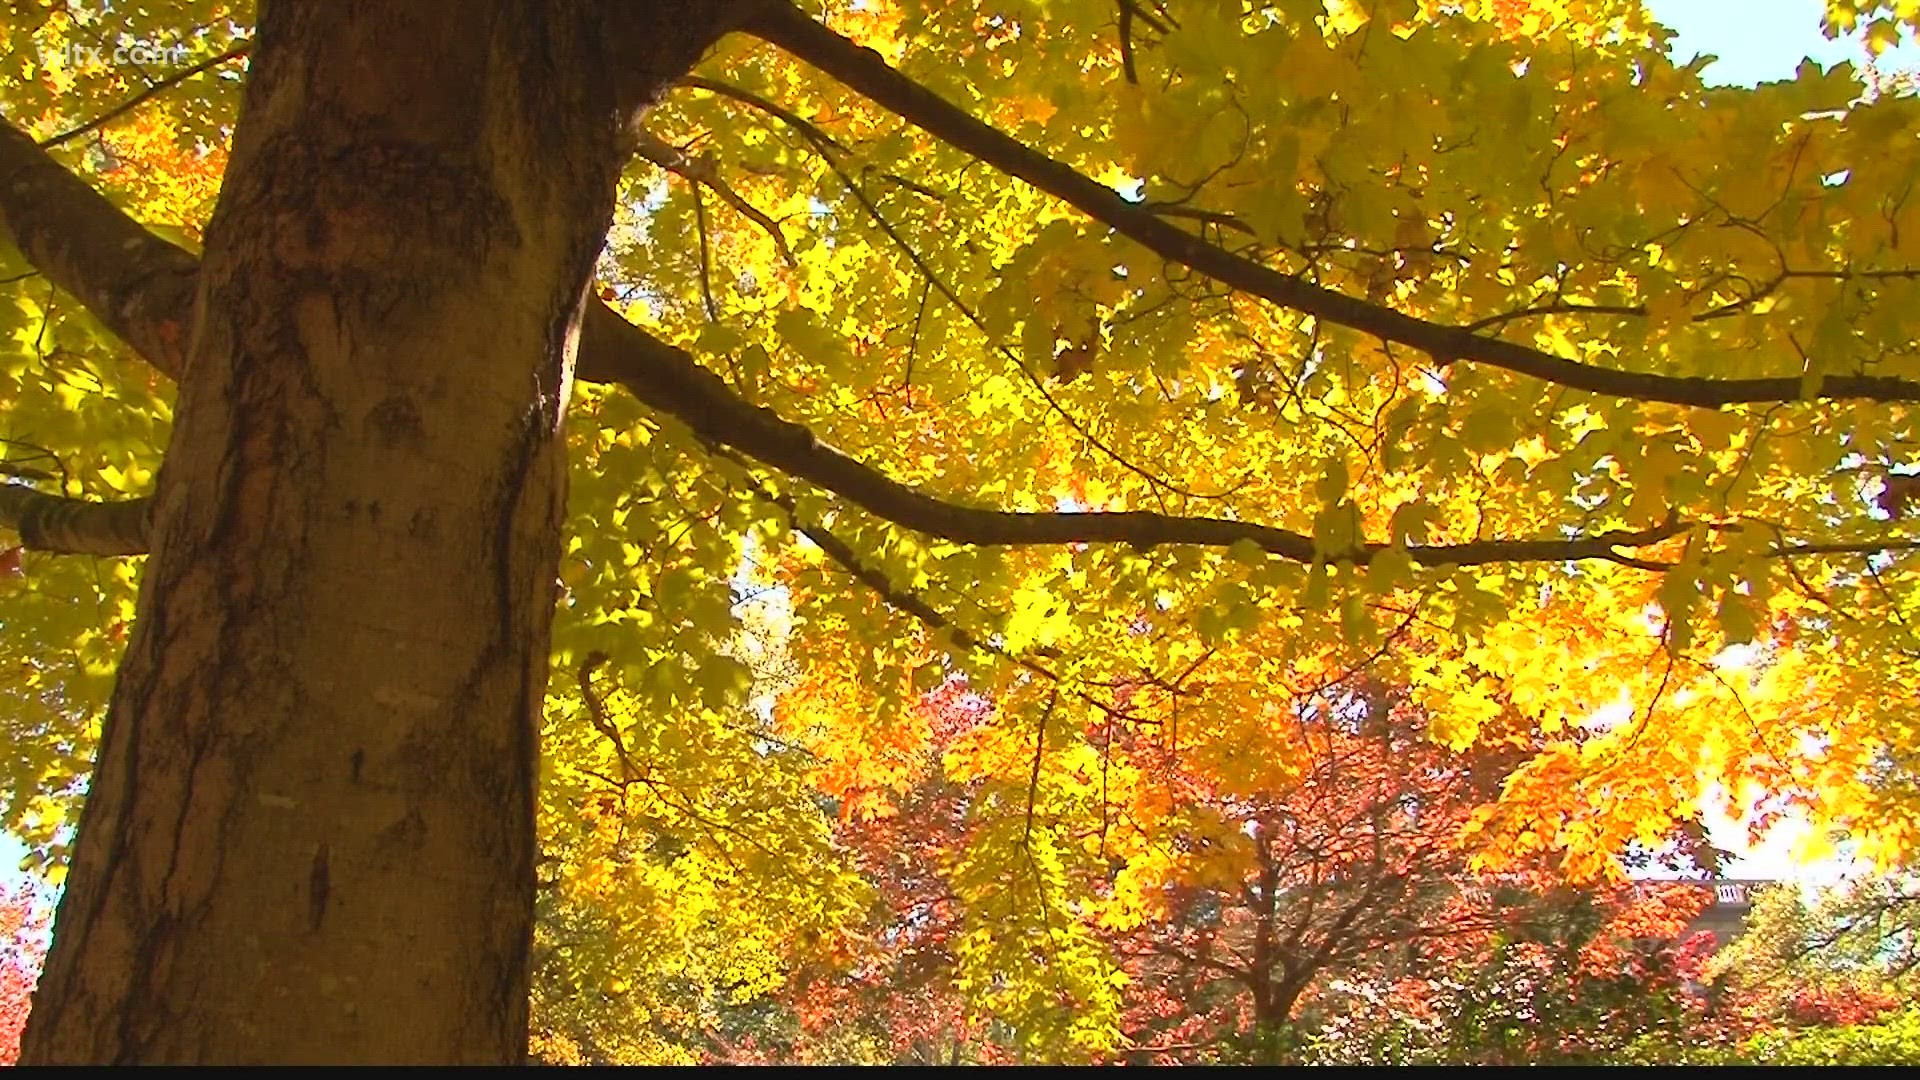 Have you ever wondered how rain affects the leaves' colorful display? News 19 Meteorologist Erin Walker takes a look.